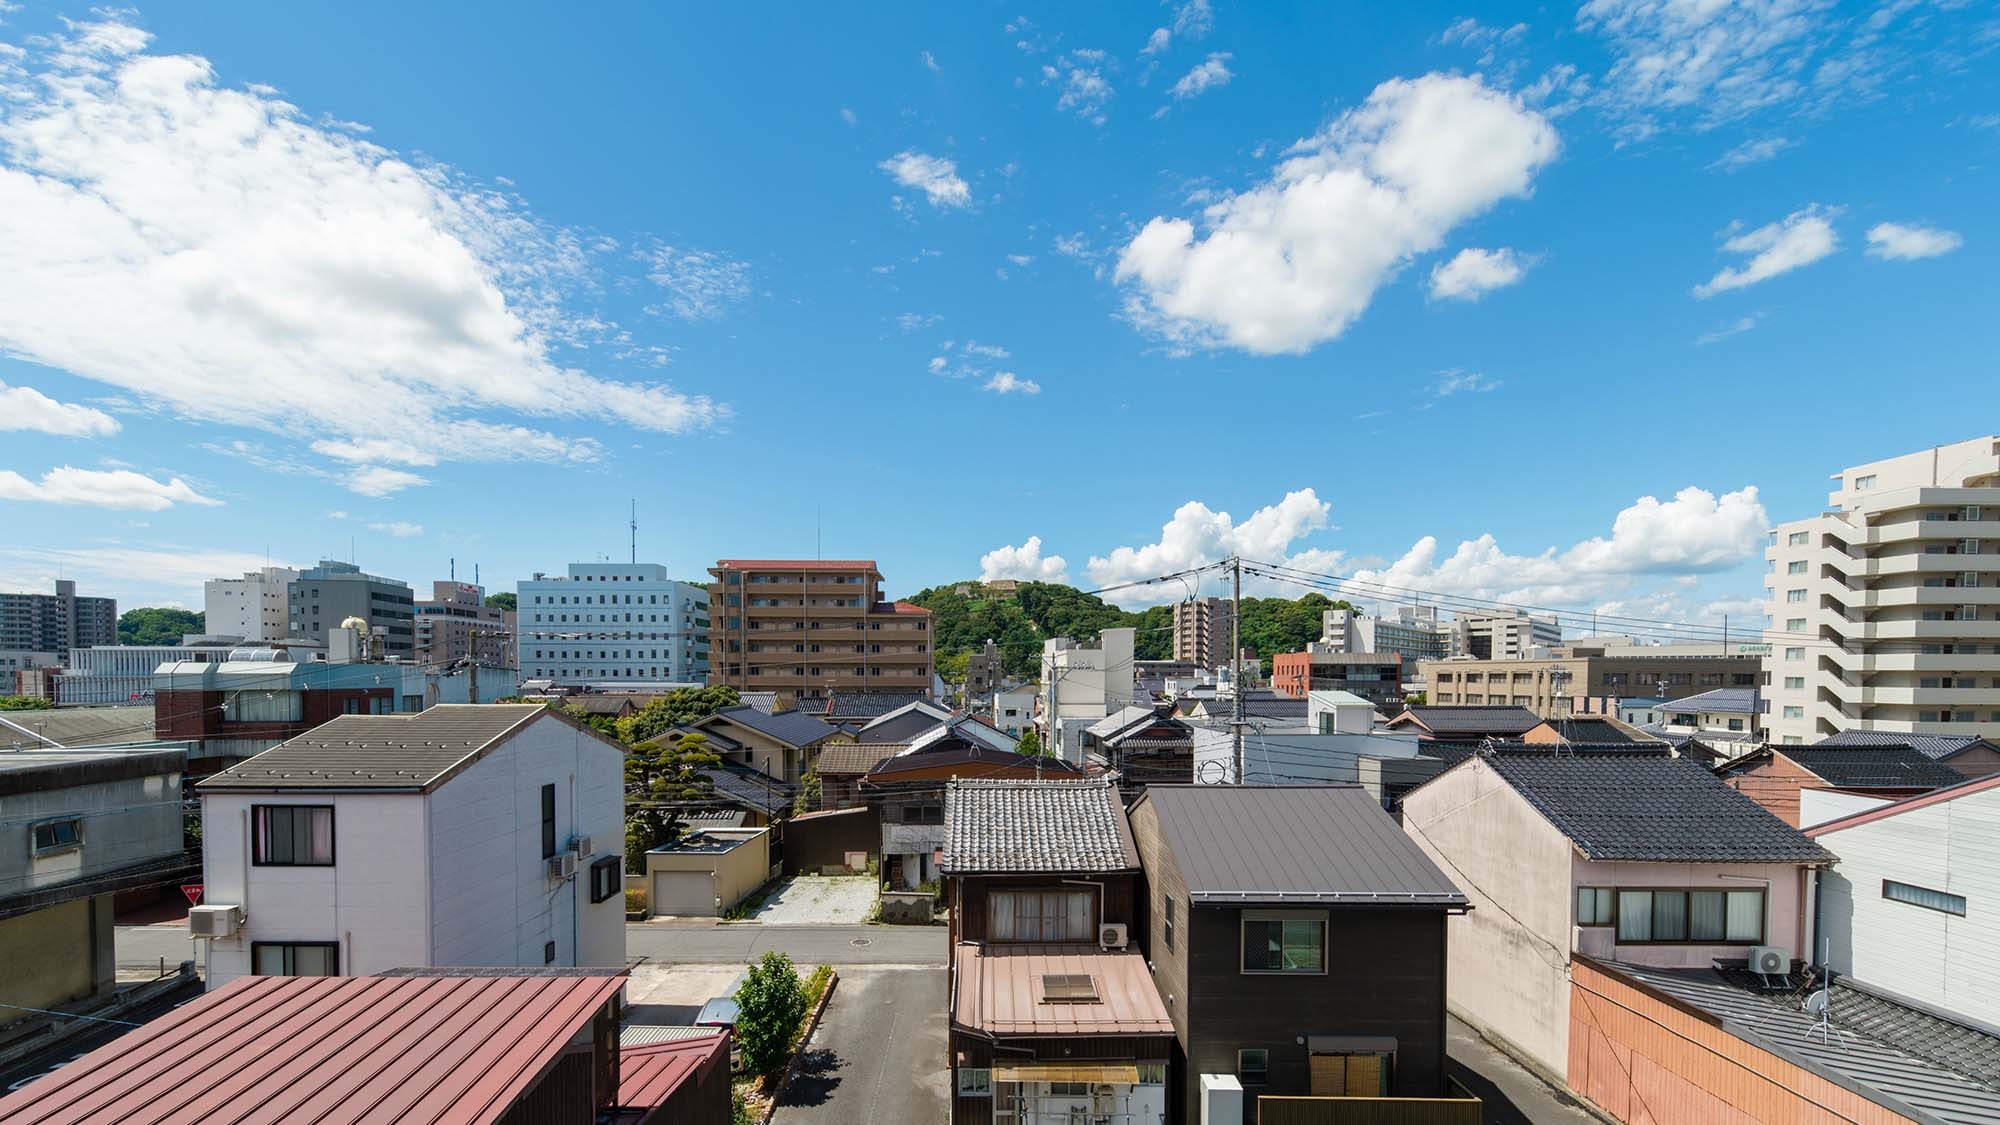 ・ [Landscape from the guest room] You can see the streets of Yonago from any room.